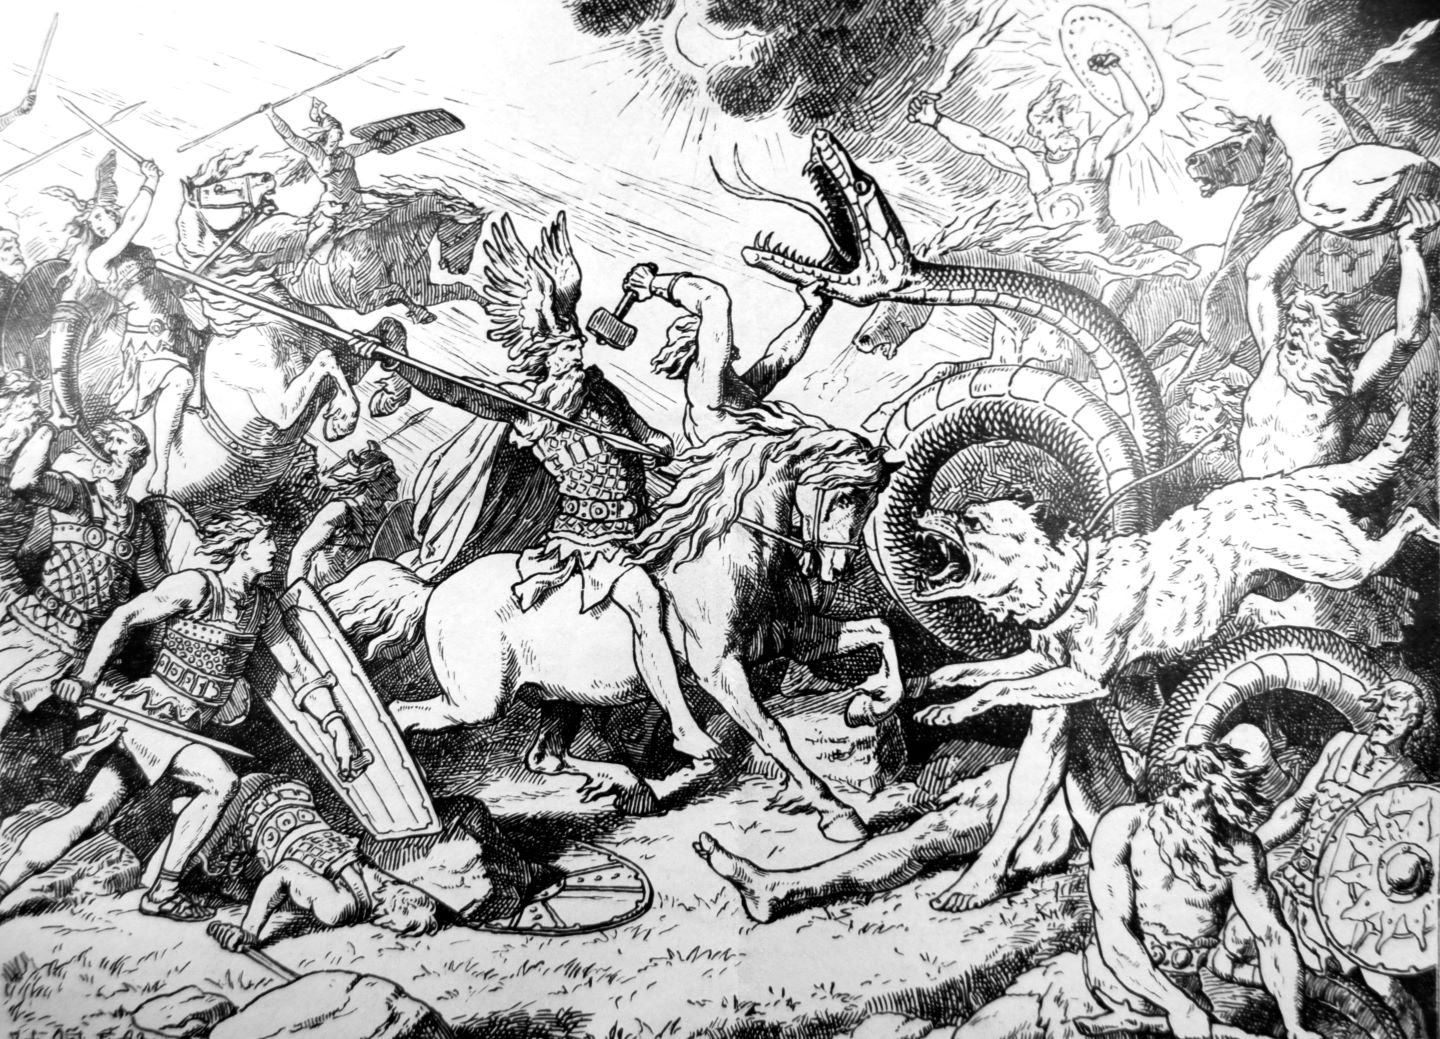 A drawing of Ragnarok, depicted as a chaotic battle between a wide array of mythical figures and animals. A man on a horse with a spear is at the center of the action, with another man fighting a large serpant with a hammer behind him.